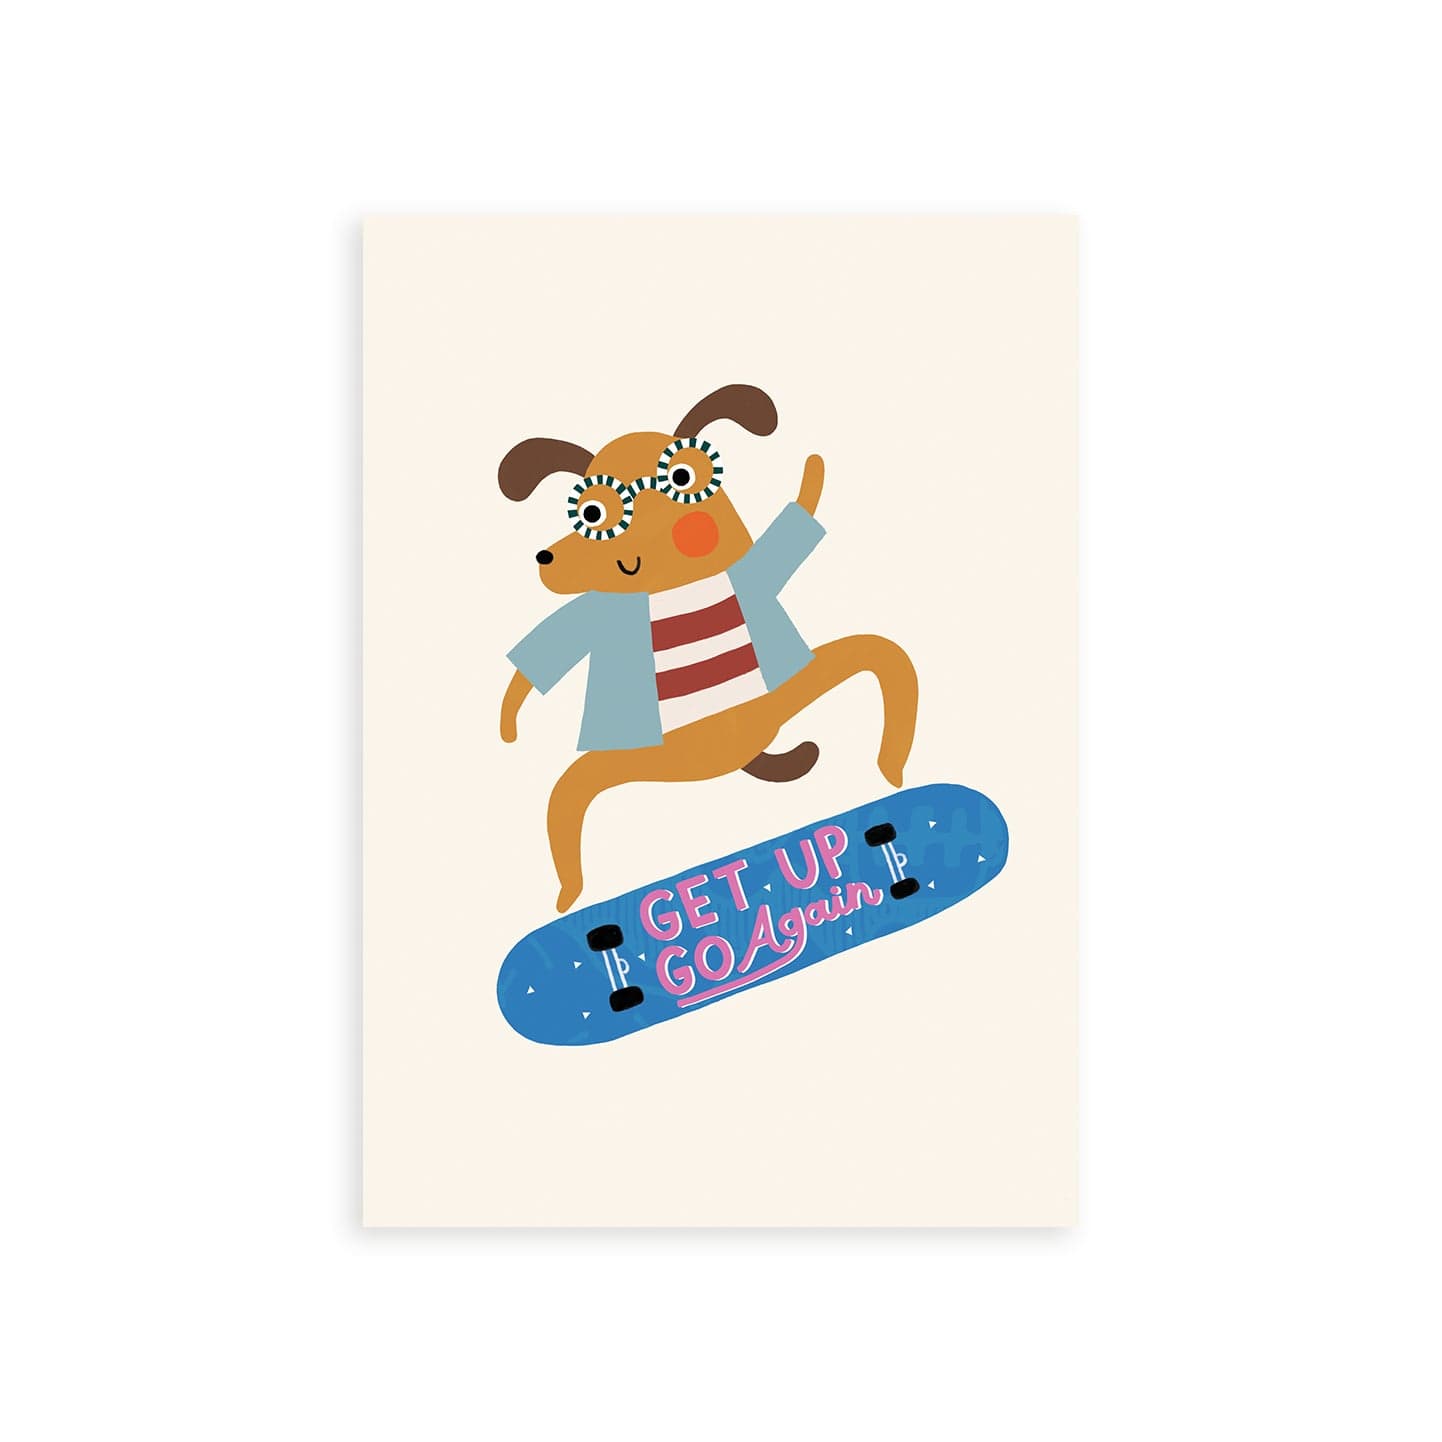 Our Rad Dog Art Print features a brown dog doing a flip on a skateboard. The dog is wearing a denim blue jacket and a bright pink and orange top while wearing black and white striped glasses on a cream background.